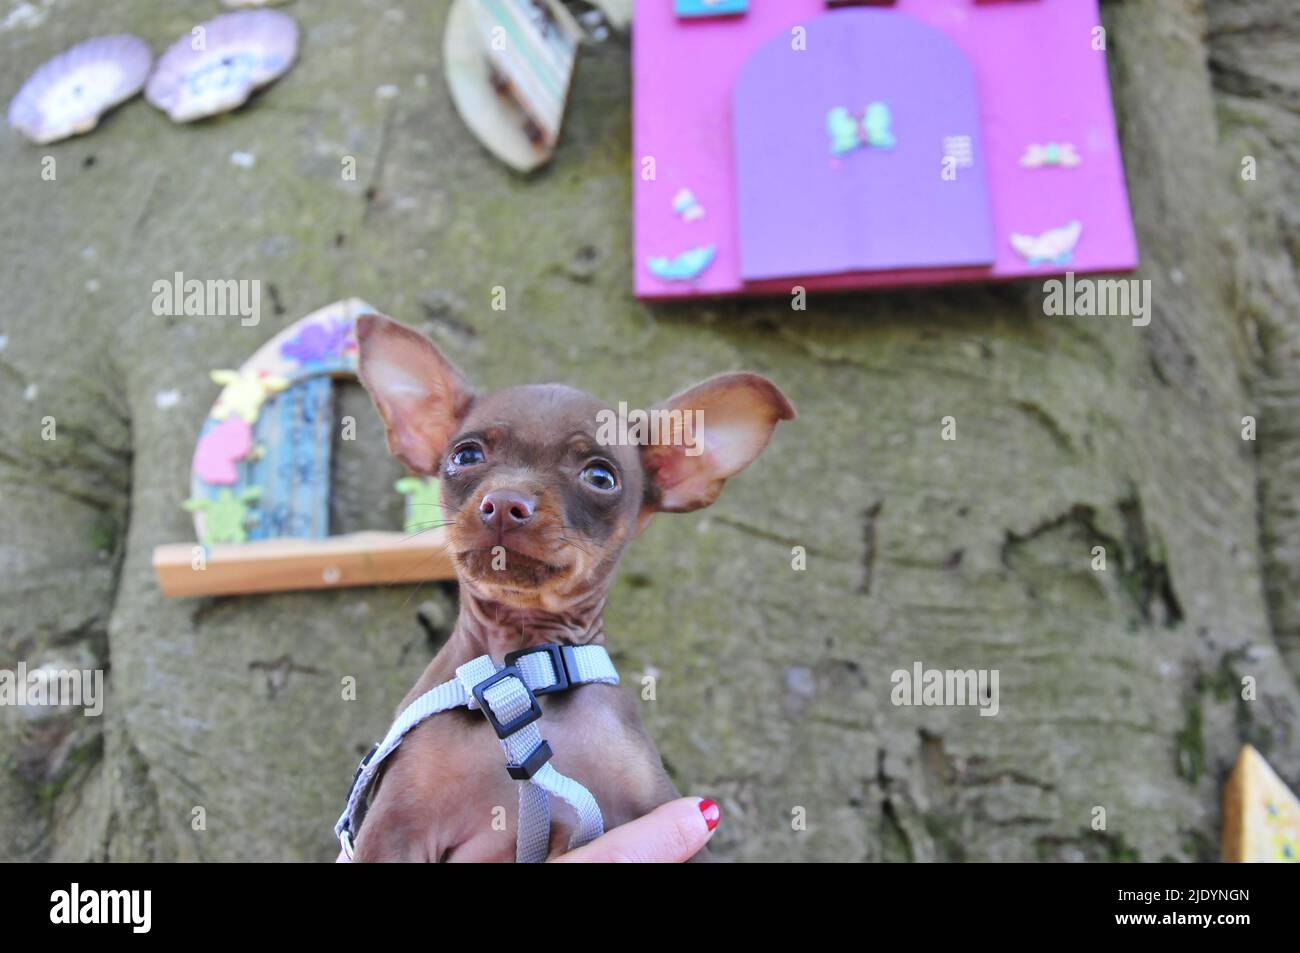 Russian toy terrier in natural environment Stock Photo